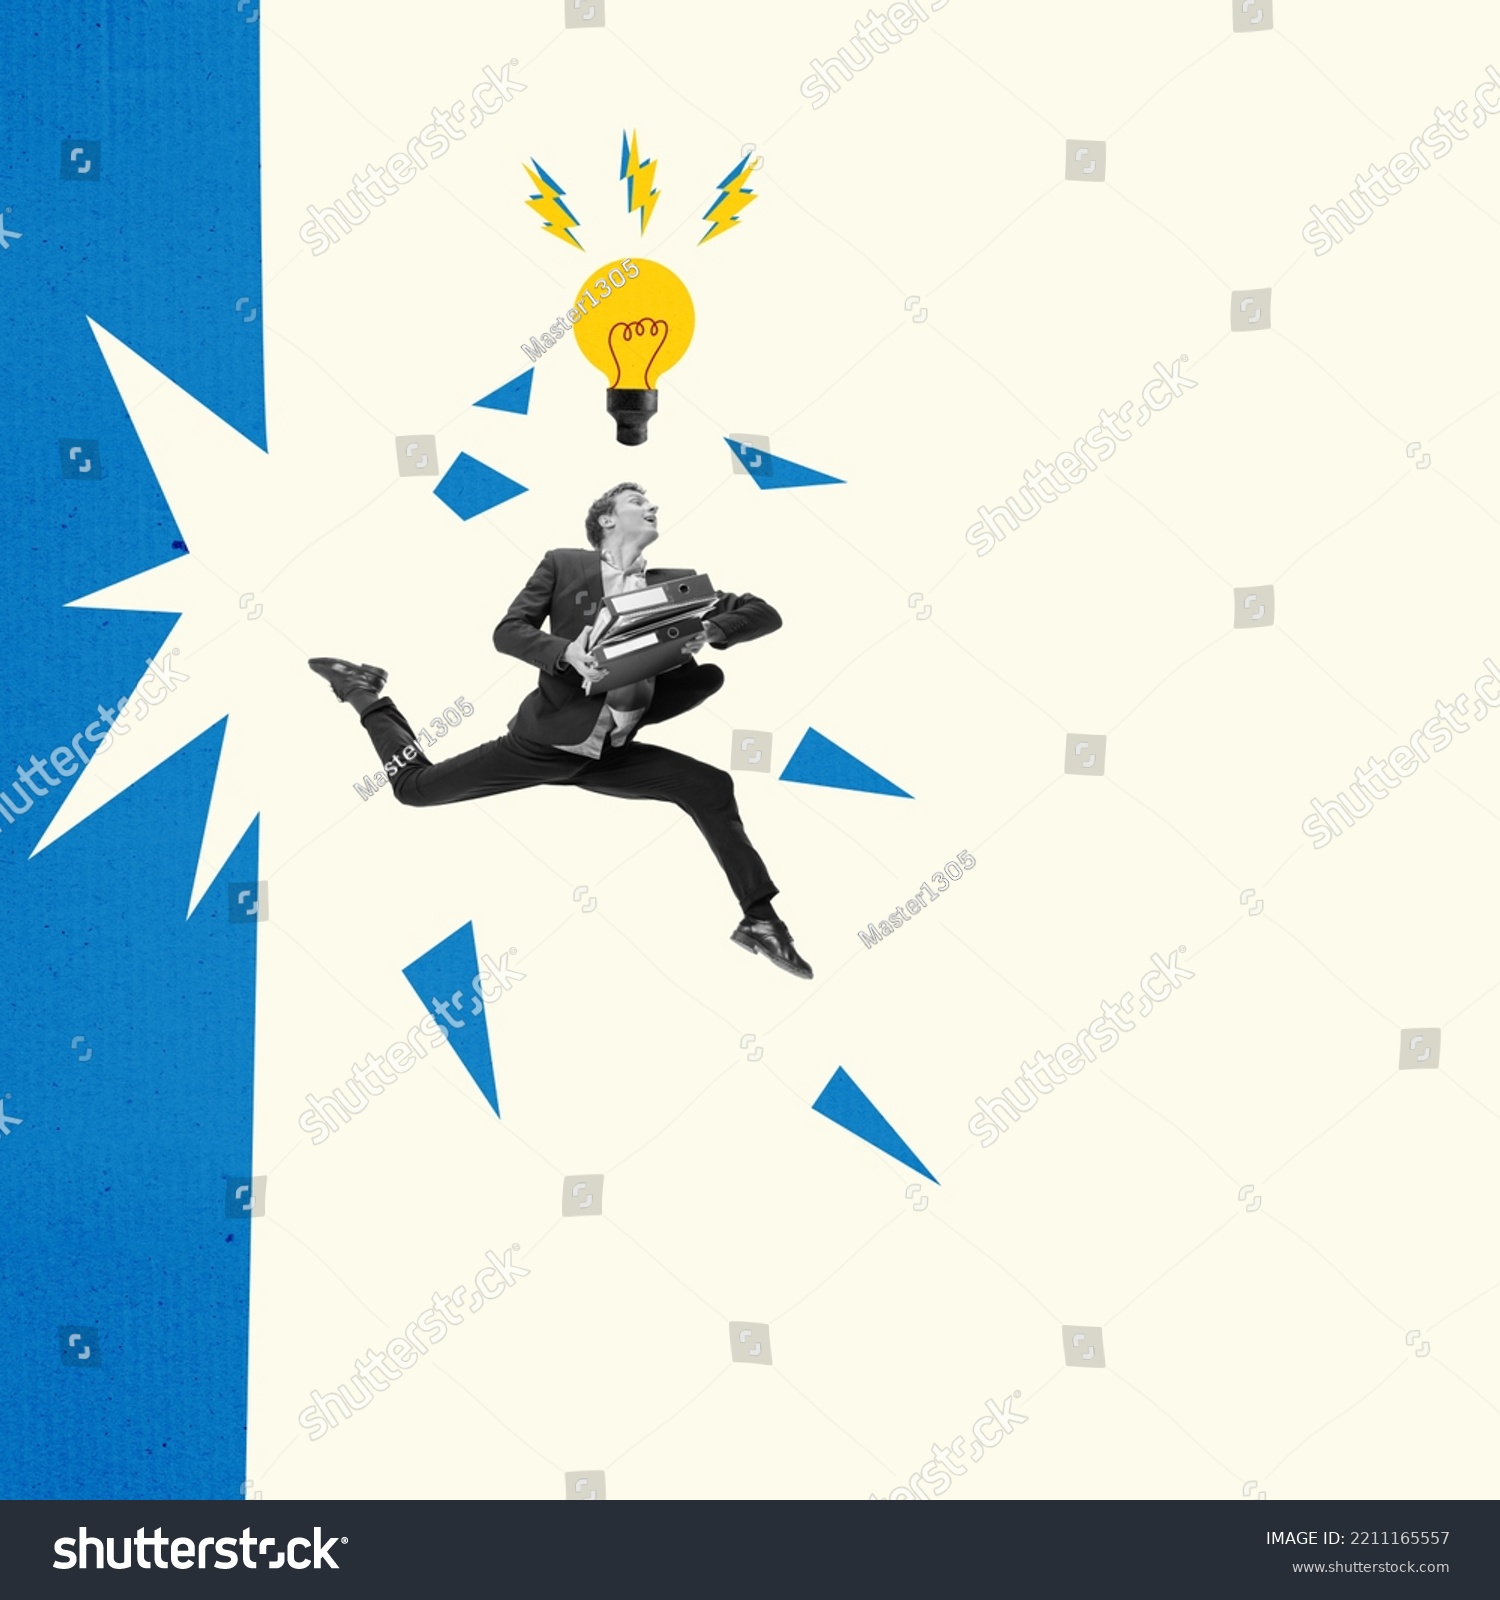 Man running with light bulb. Idea, innovation, creativity, solution concept. Businessman having a good idea for a business. Contemporary creative art collage or design. Thought process, ingenuity #2211165557